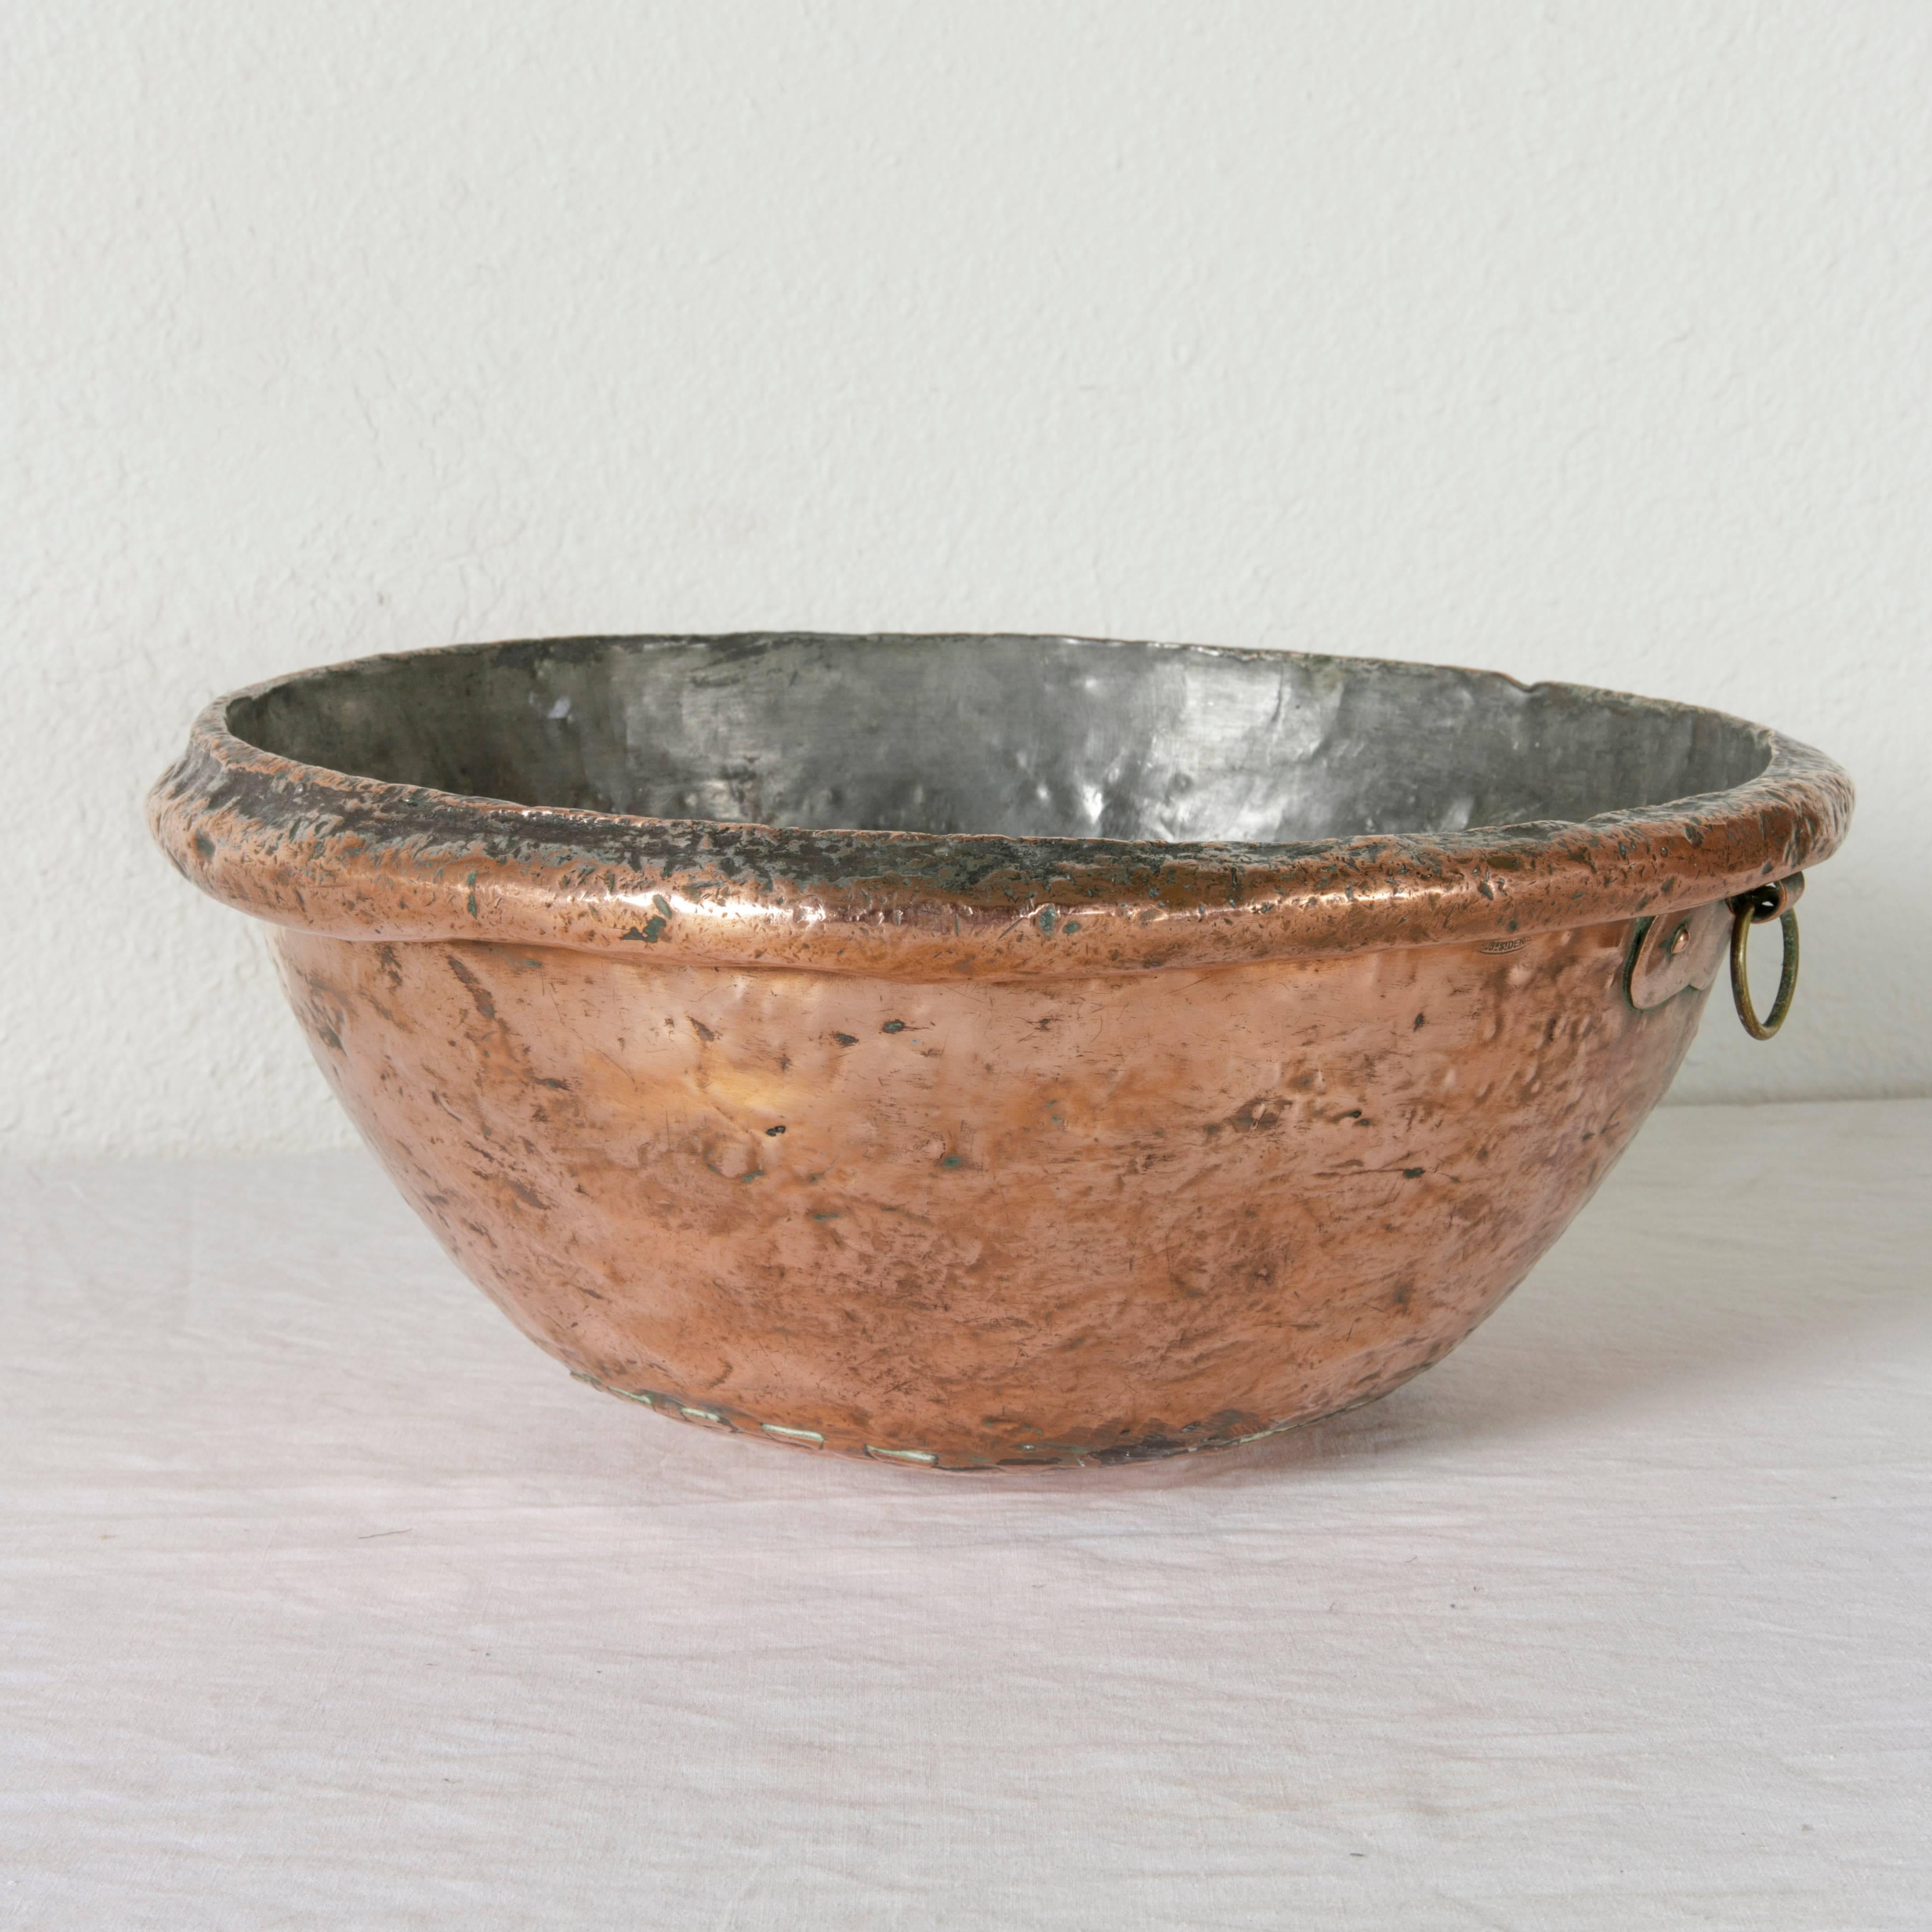 18th Century French Hand-Hammered Copper Mixing Bowl with Iron Ring for Hanging 1